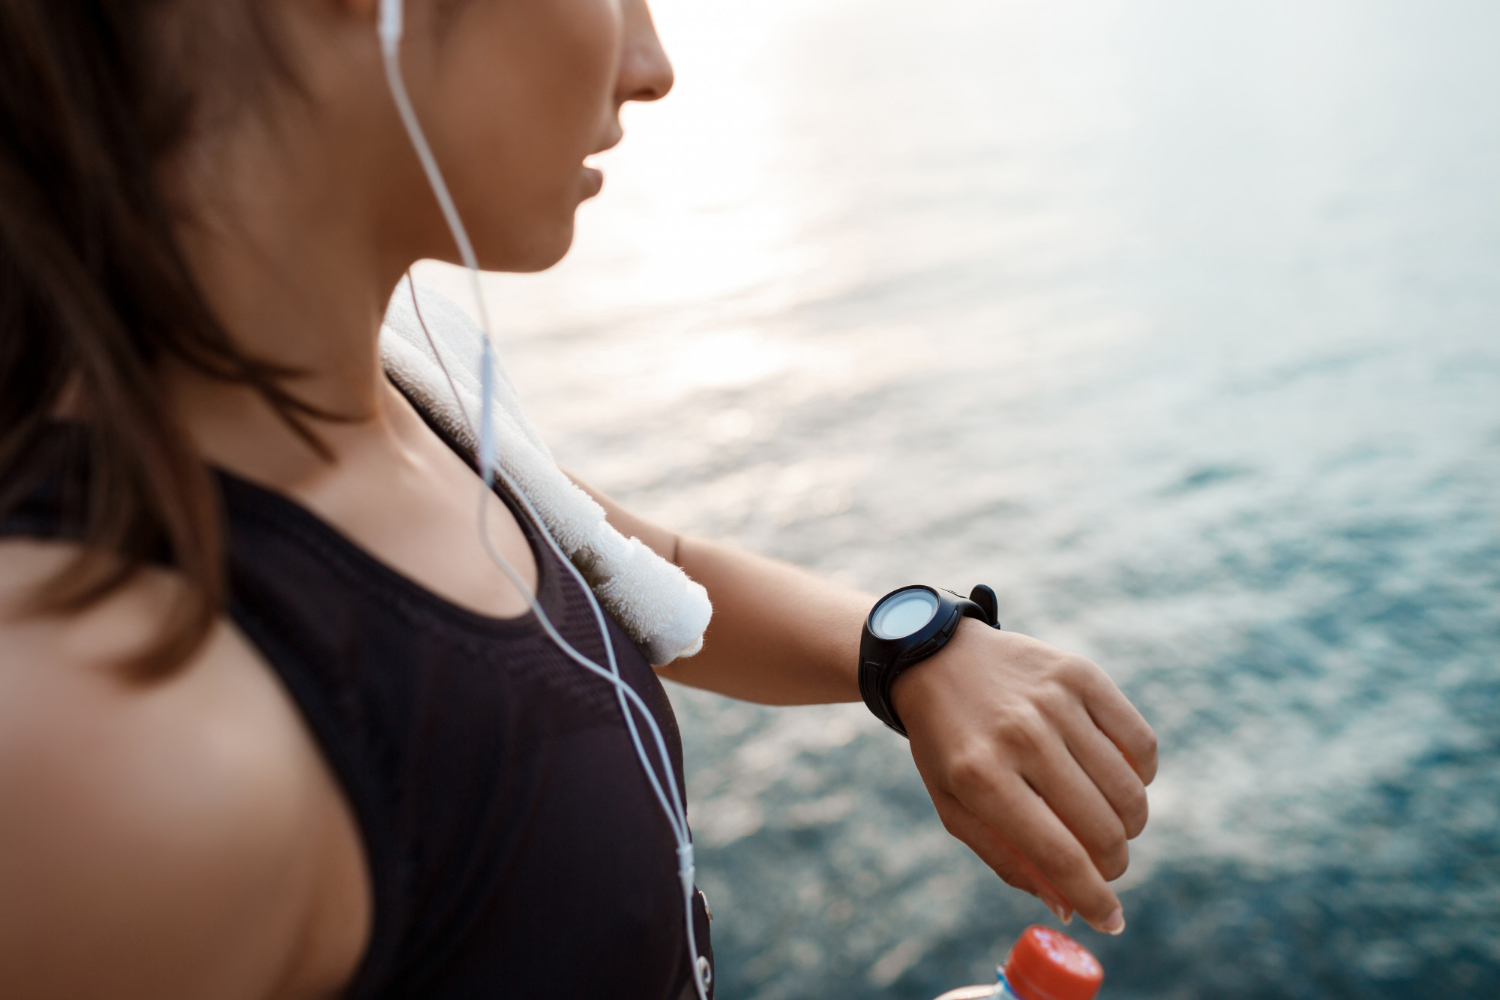 benefits of healthcare technology with wearable health devices